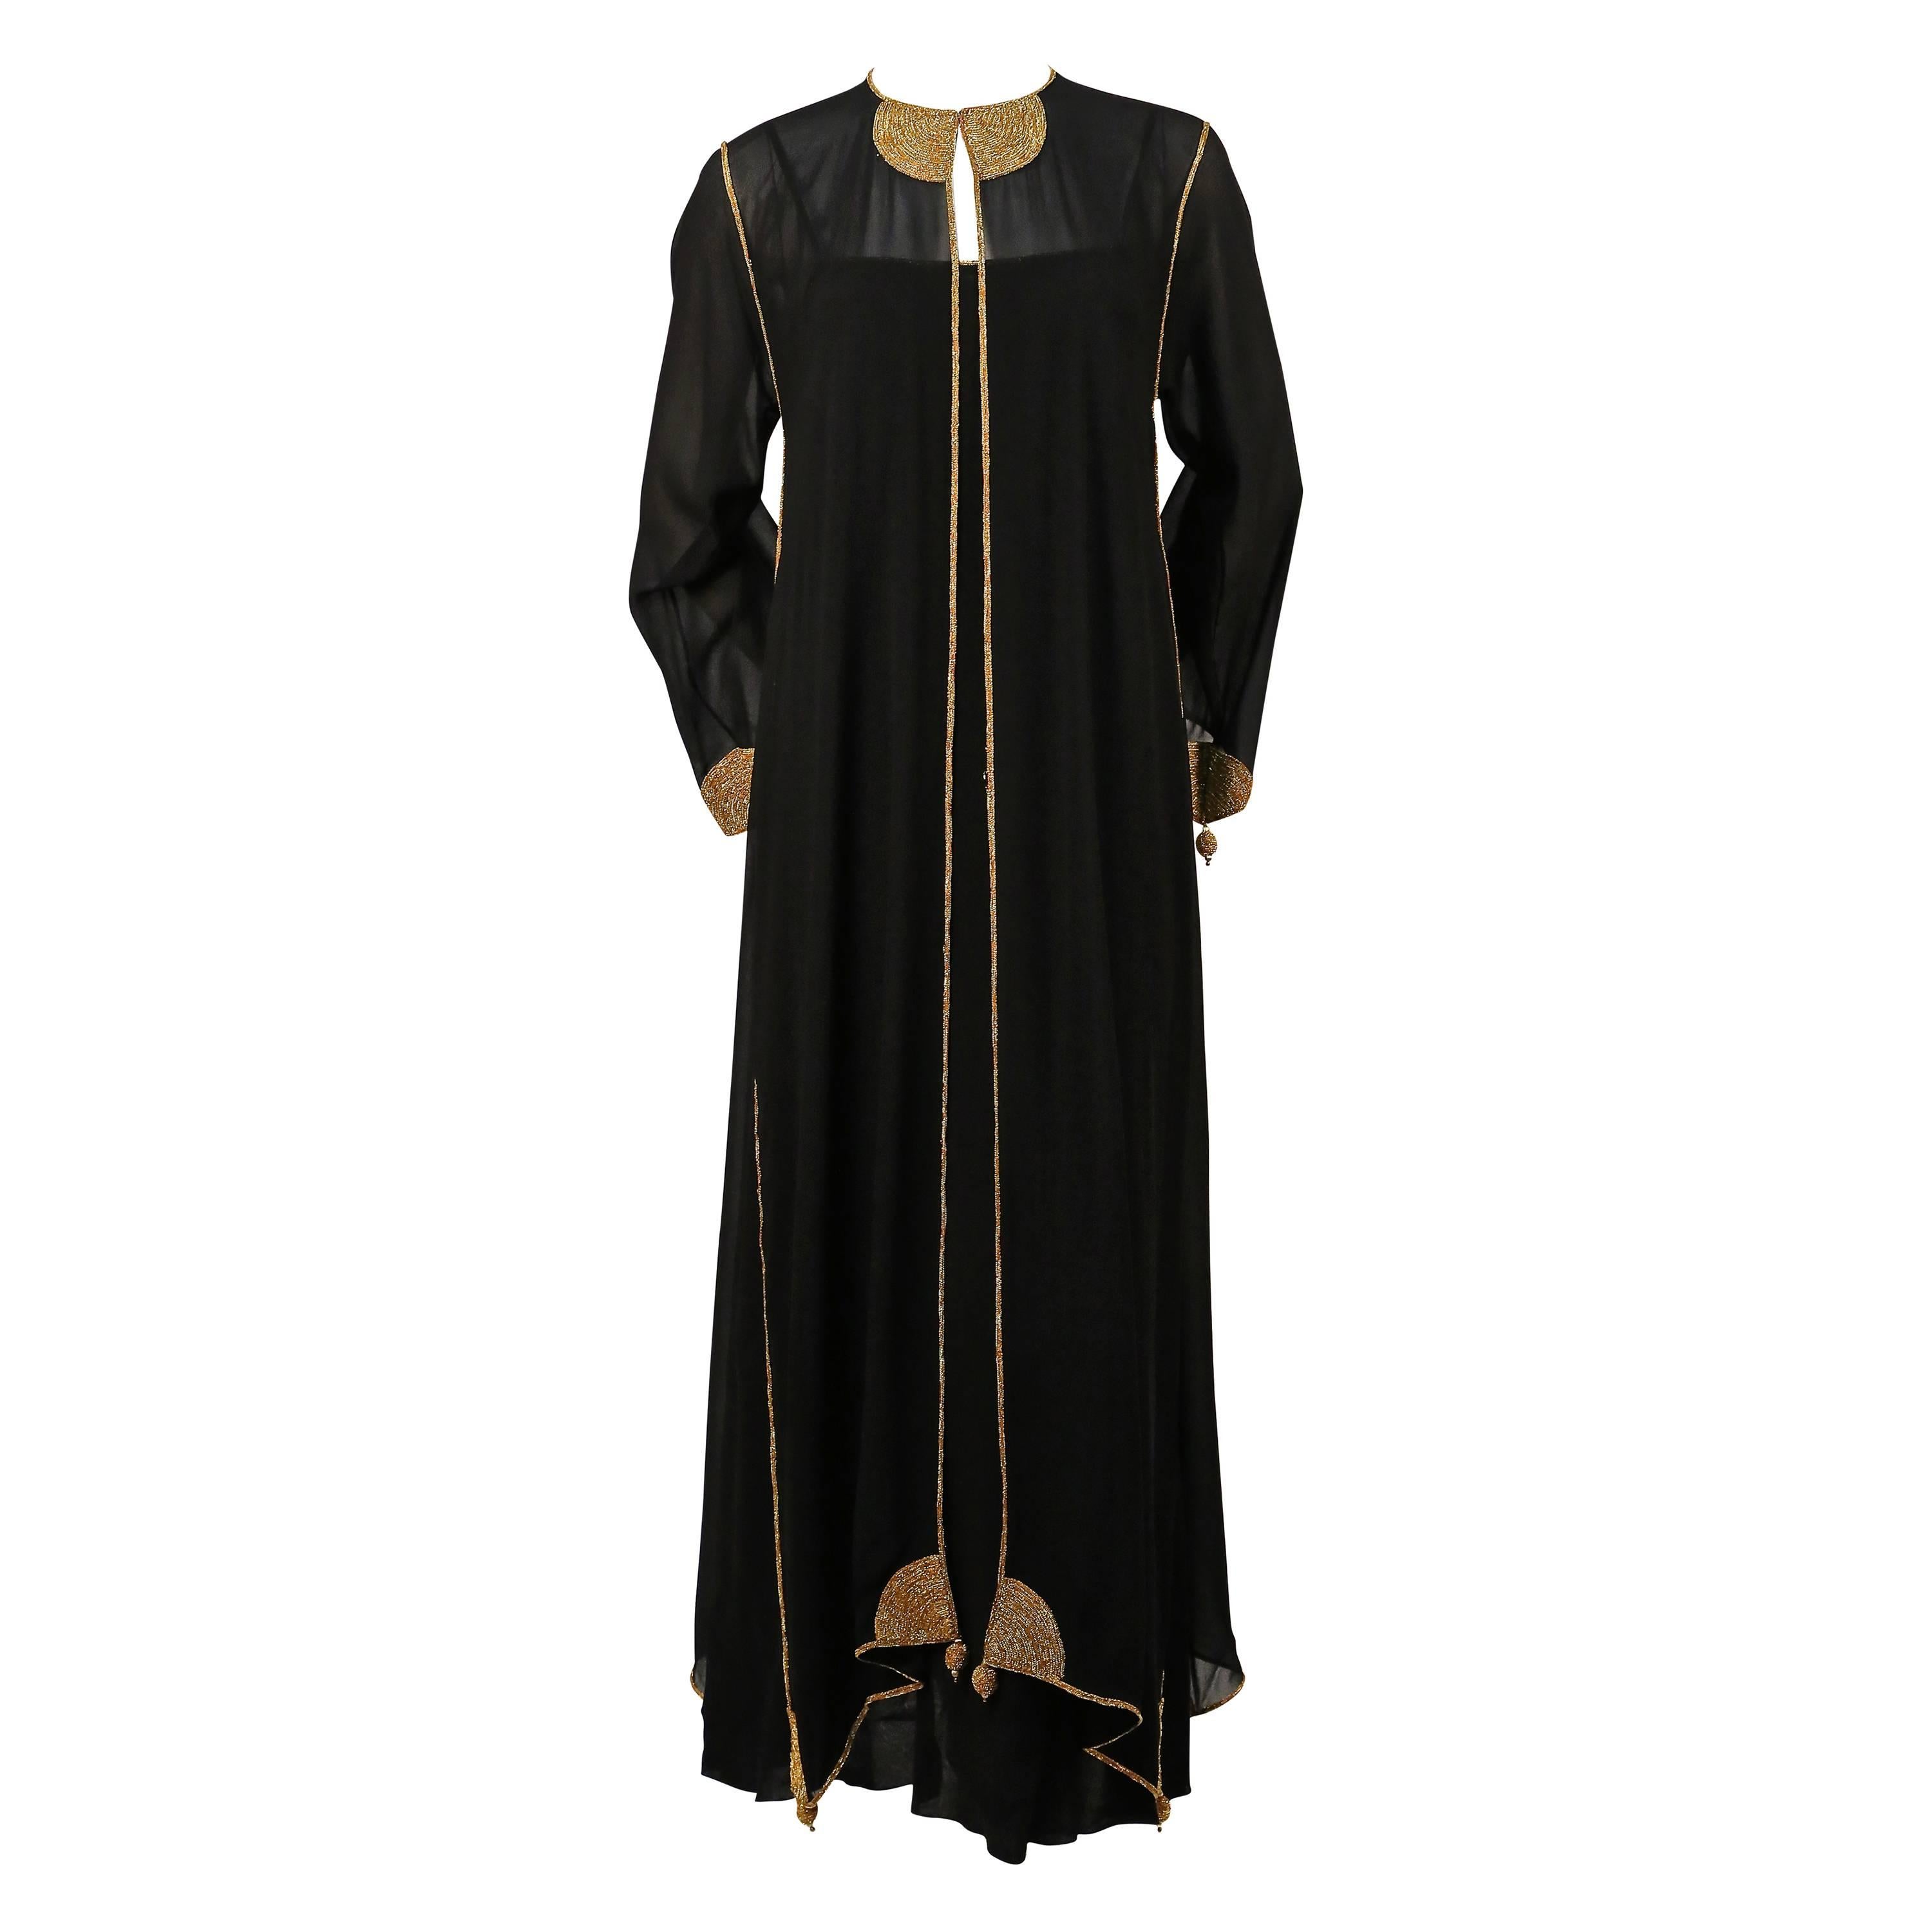 1970's KARL LAGERFELD for CHLOE black dress and kaftan jacket with gold trim